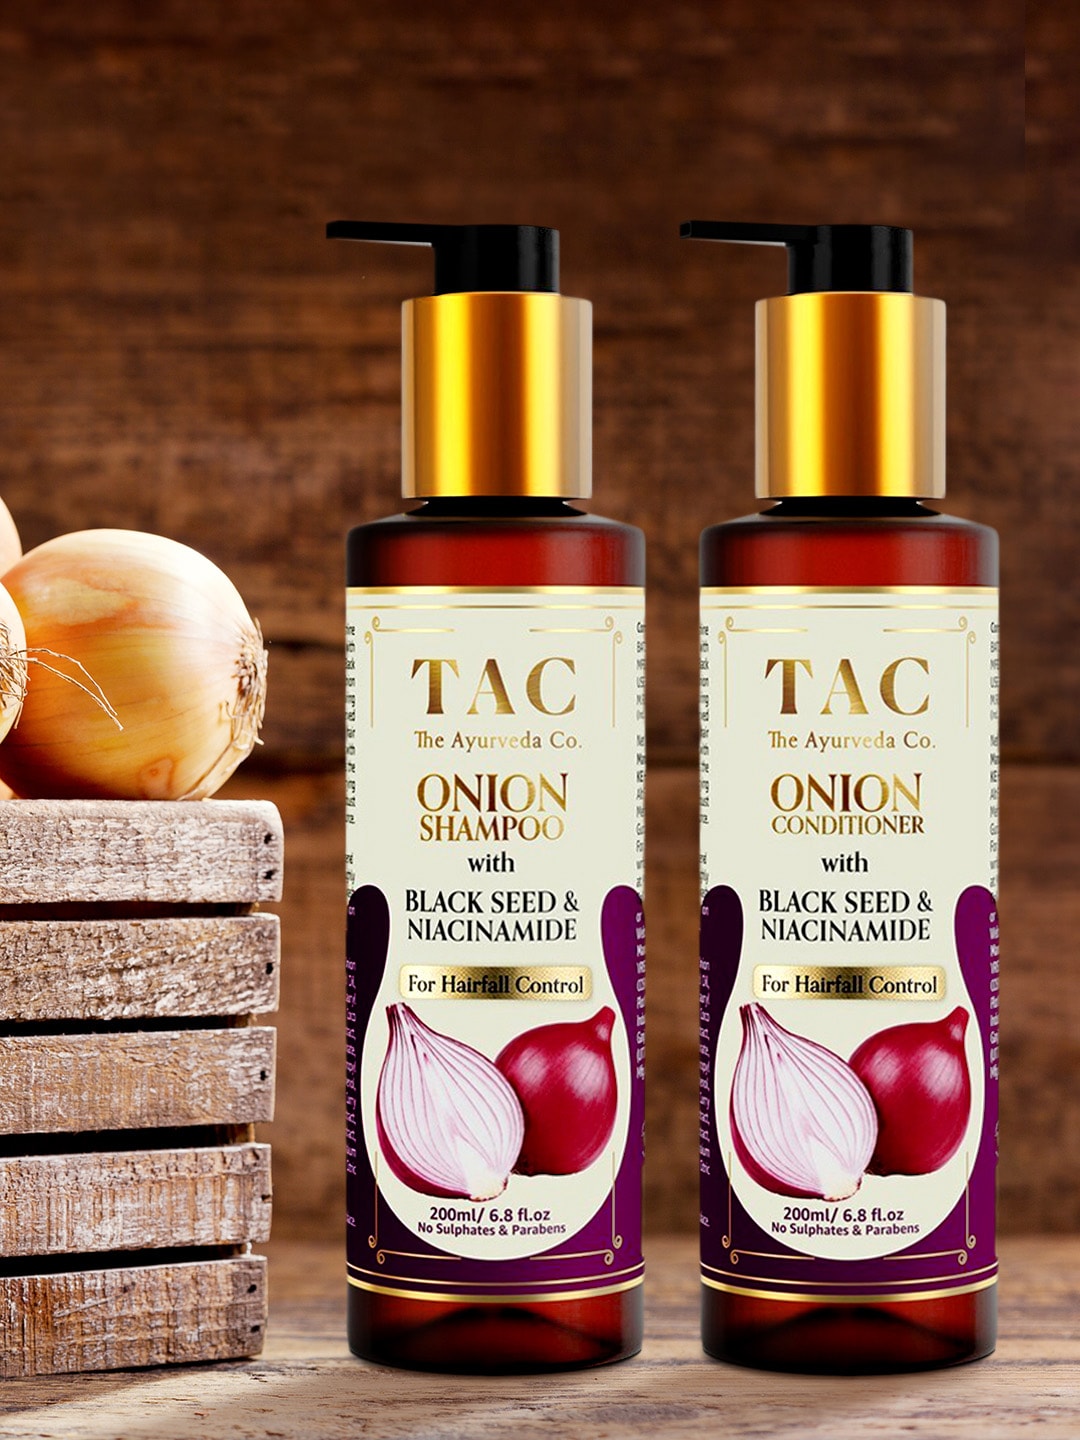 TAC - The Ayurveda Co. Unisex Combo of Onion Shampoo & Onion Conditioner Price in India